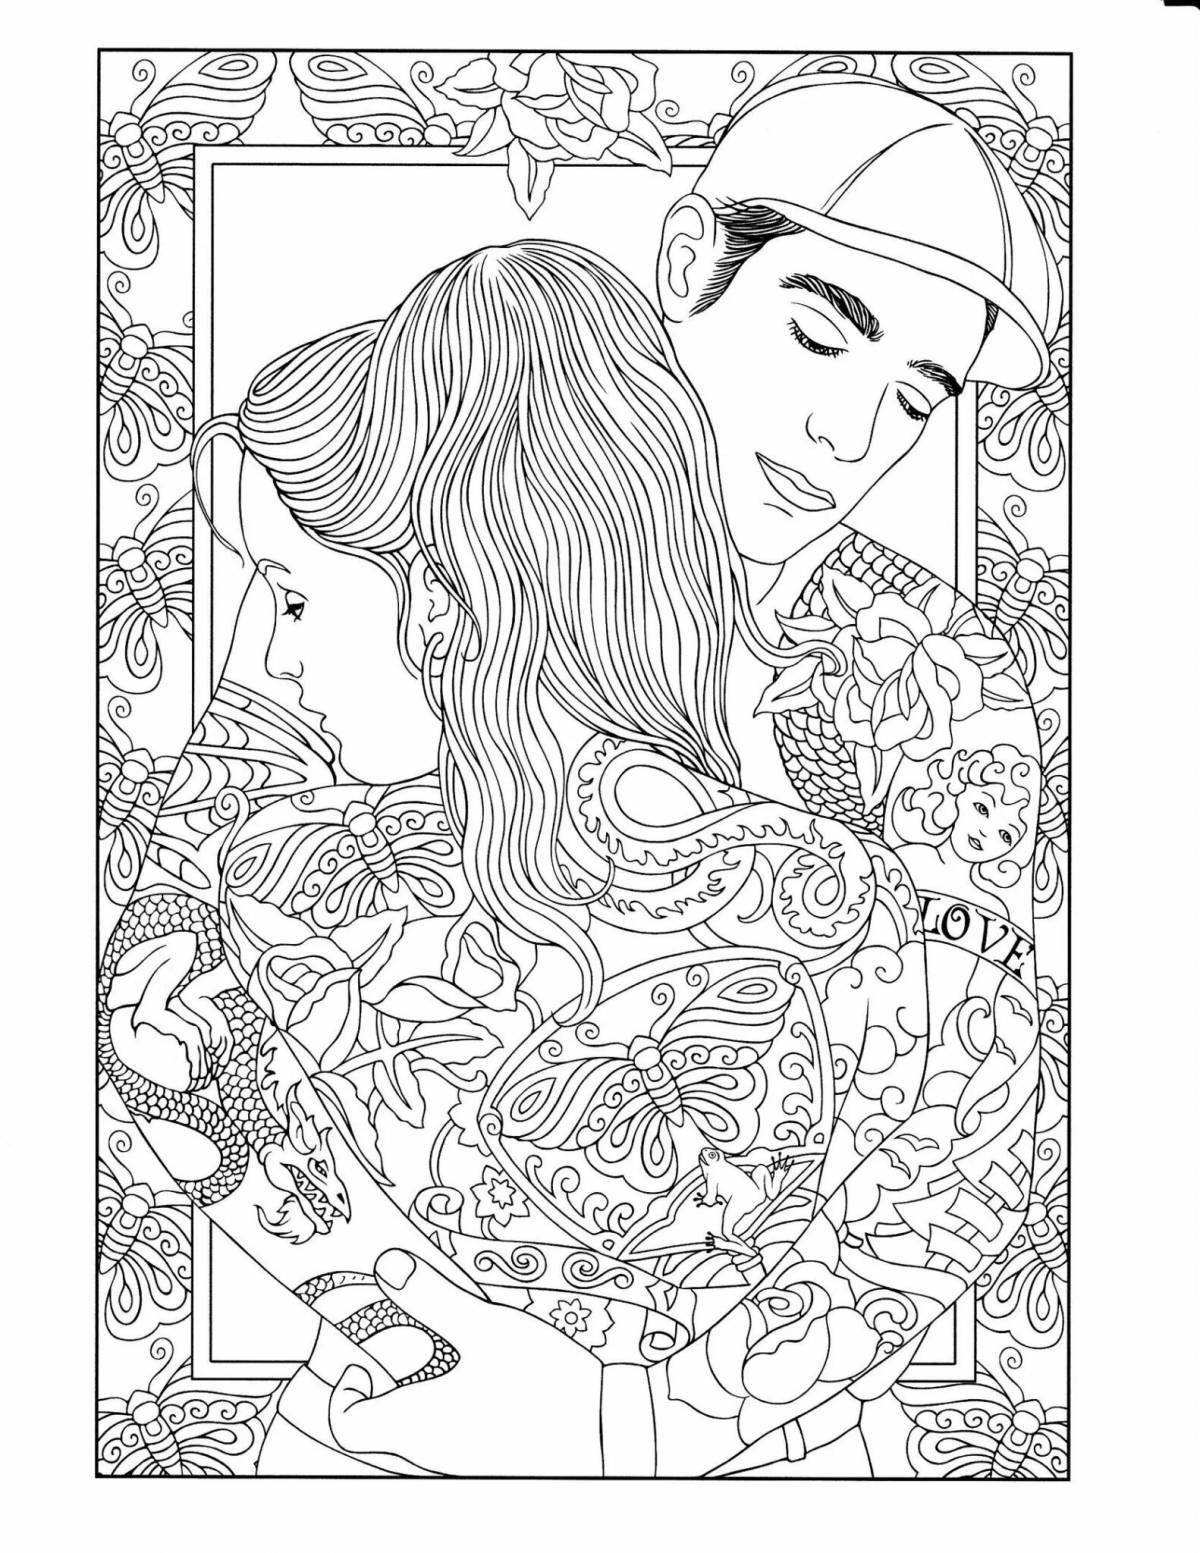 Soothing anti-stress coloring book for adults 18